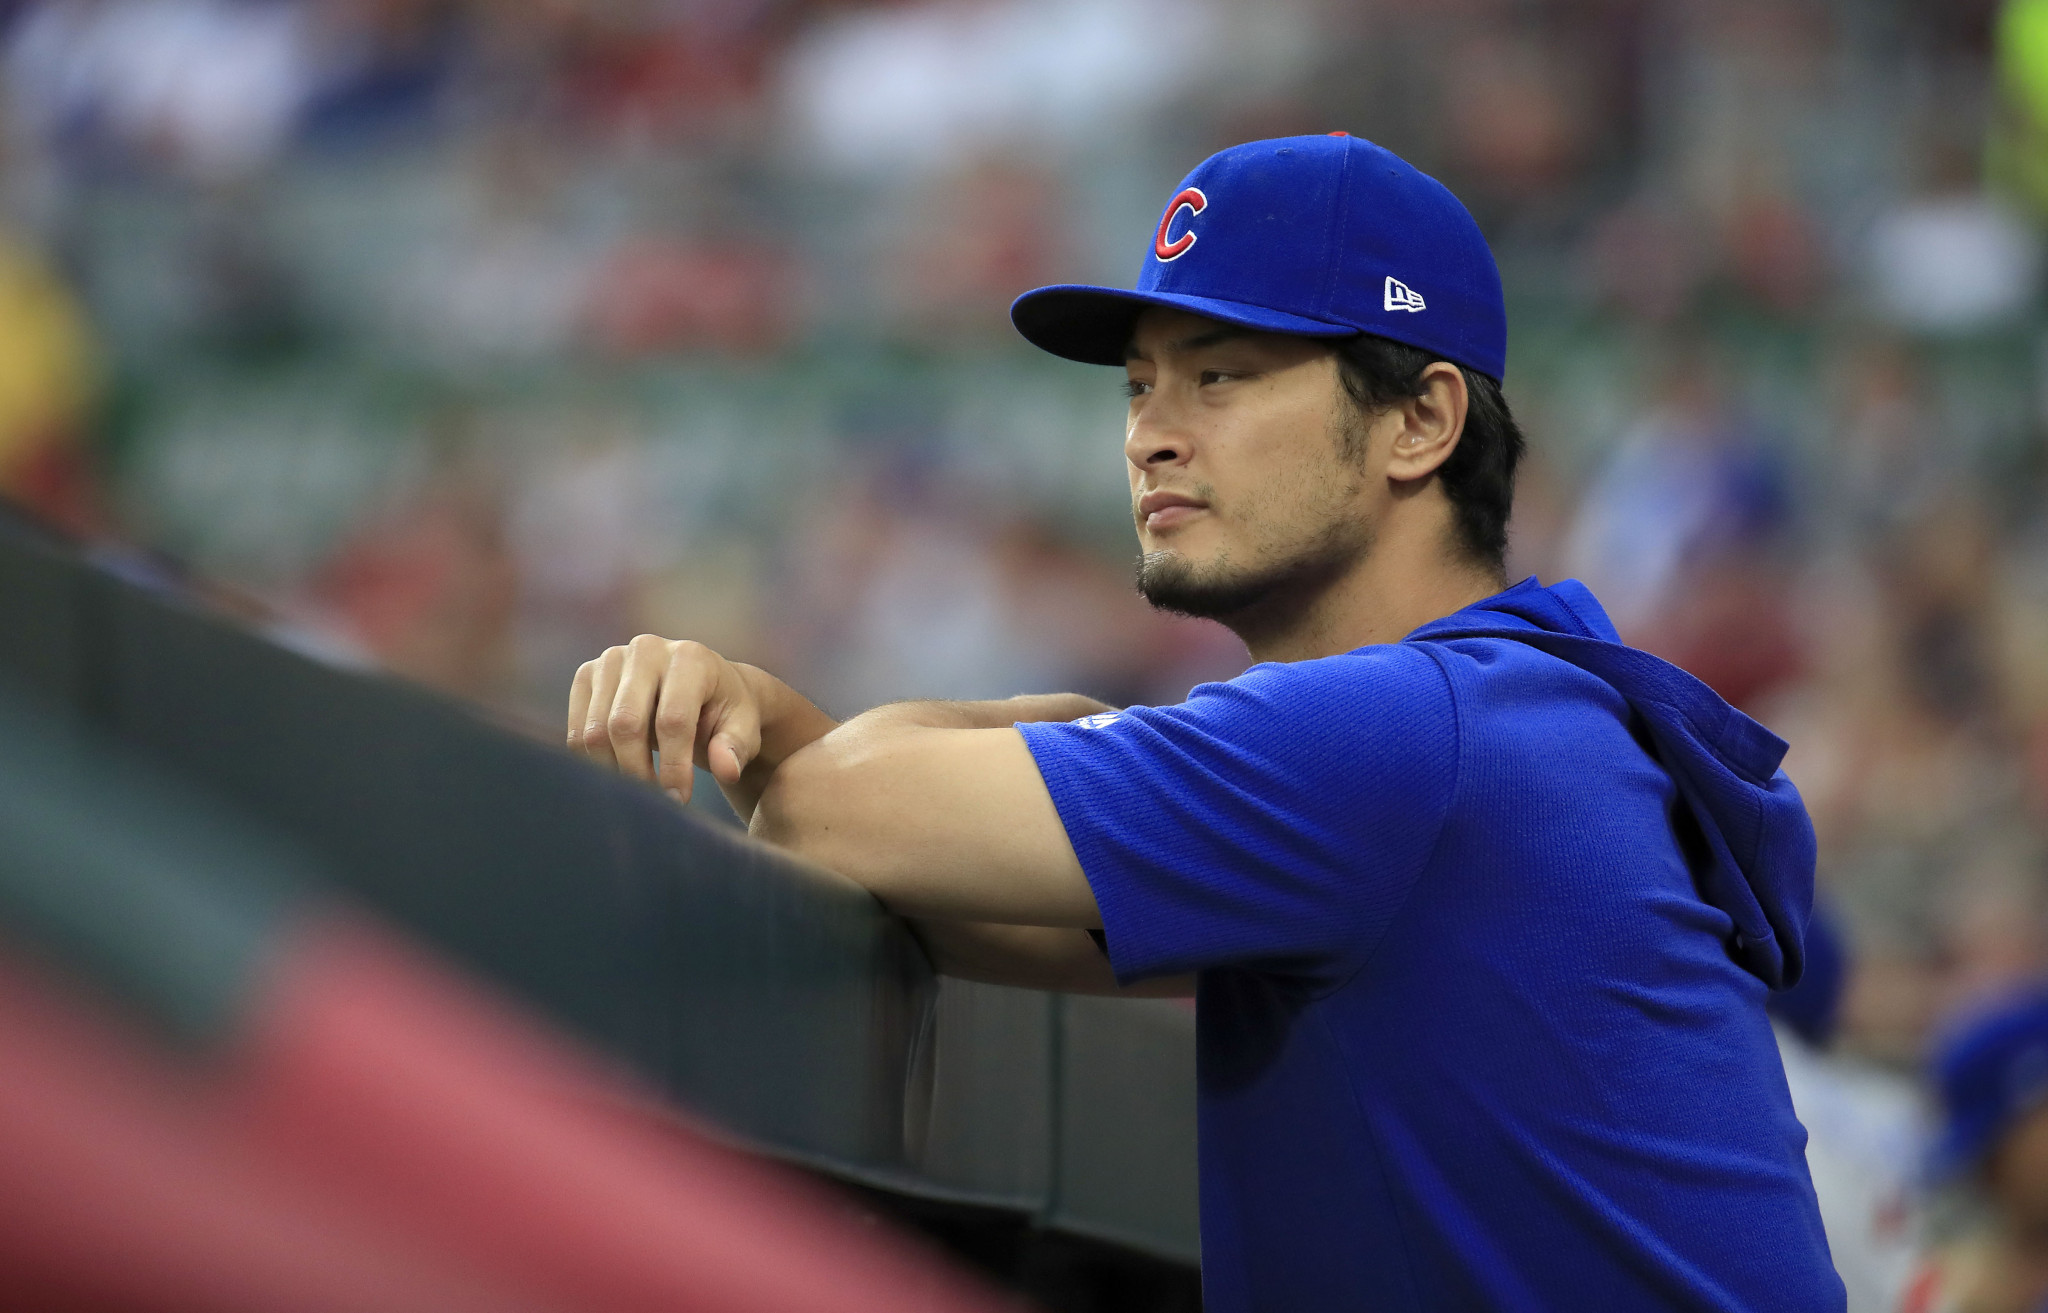 Yu Darvish of Chicago Cubs played at the Under-18 Baseball World Cup earlier in his career ©Getty Images